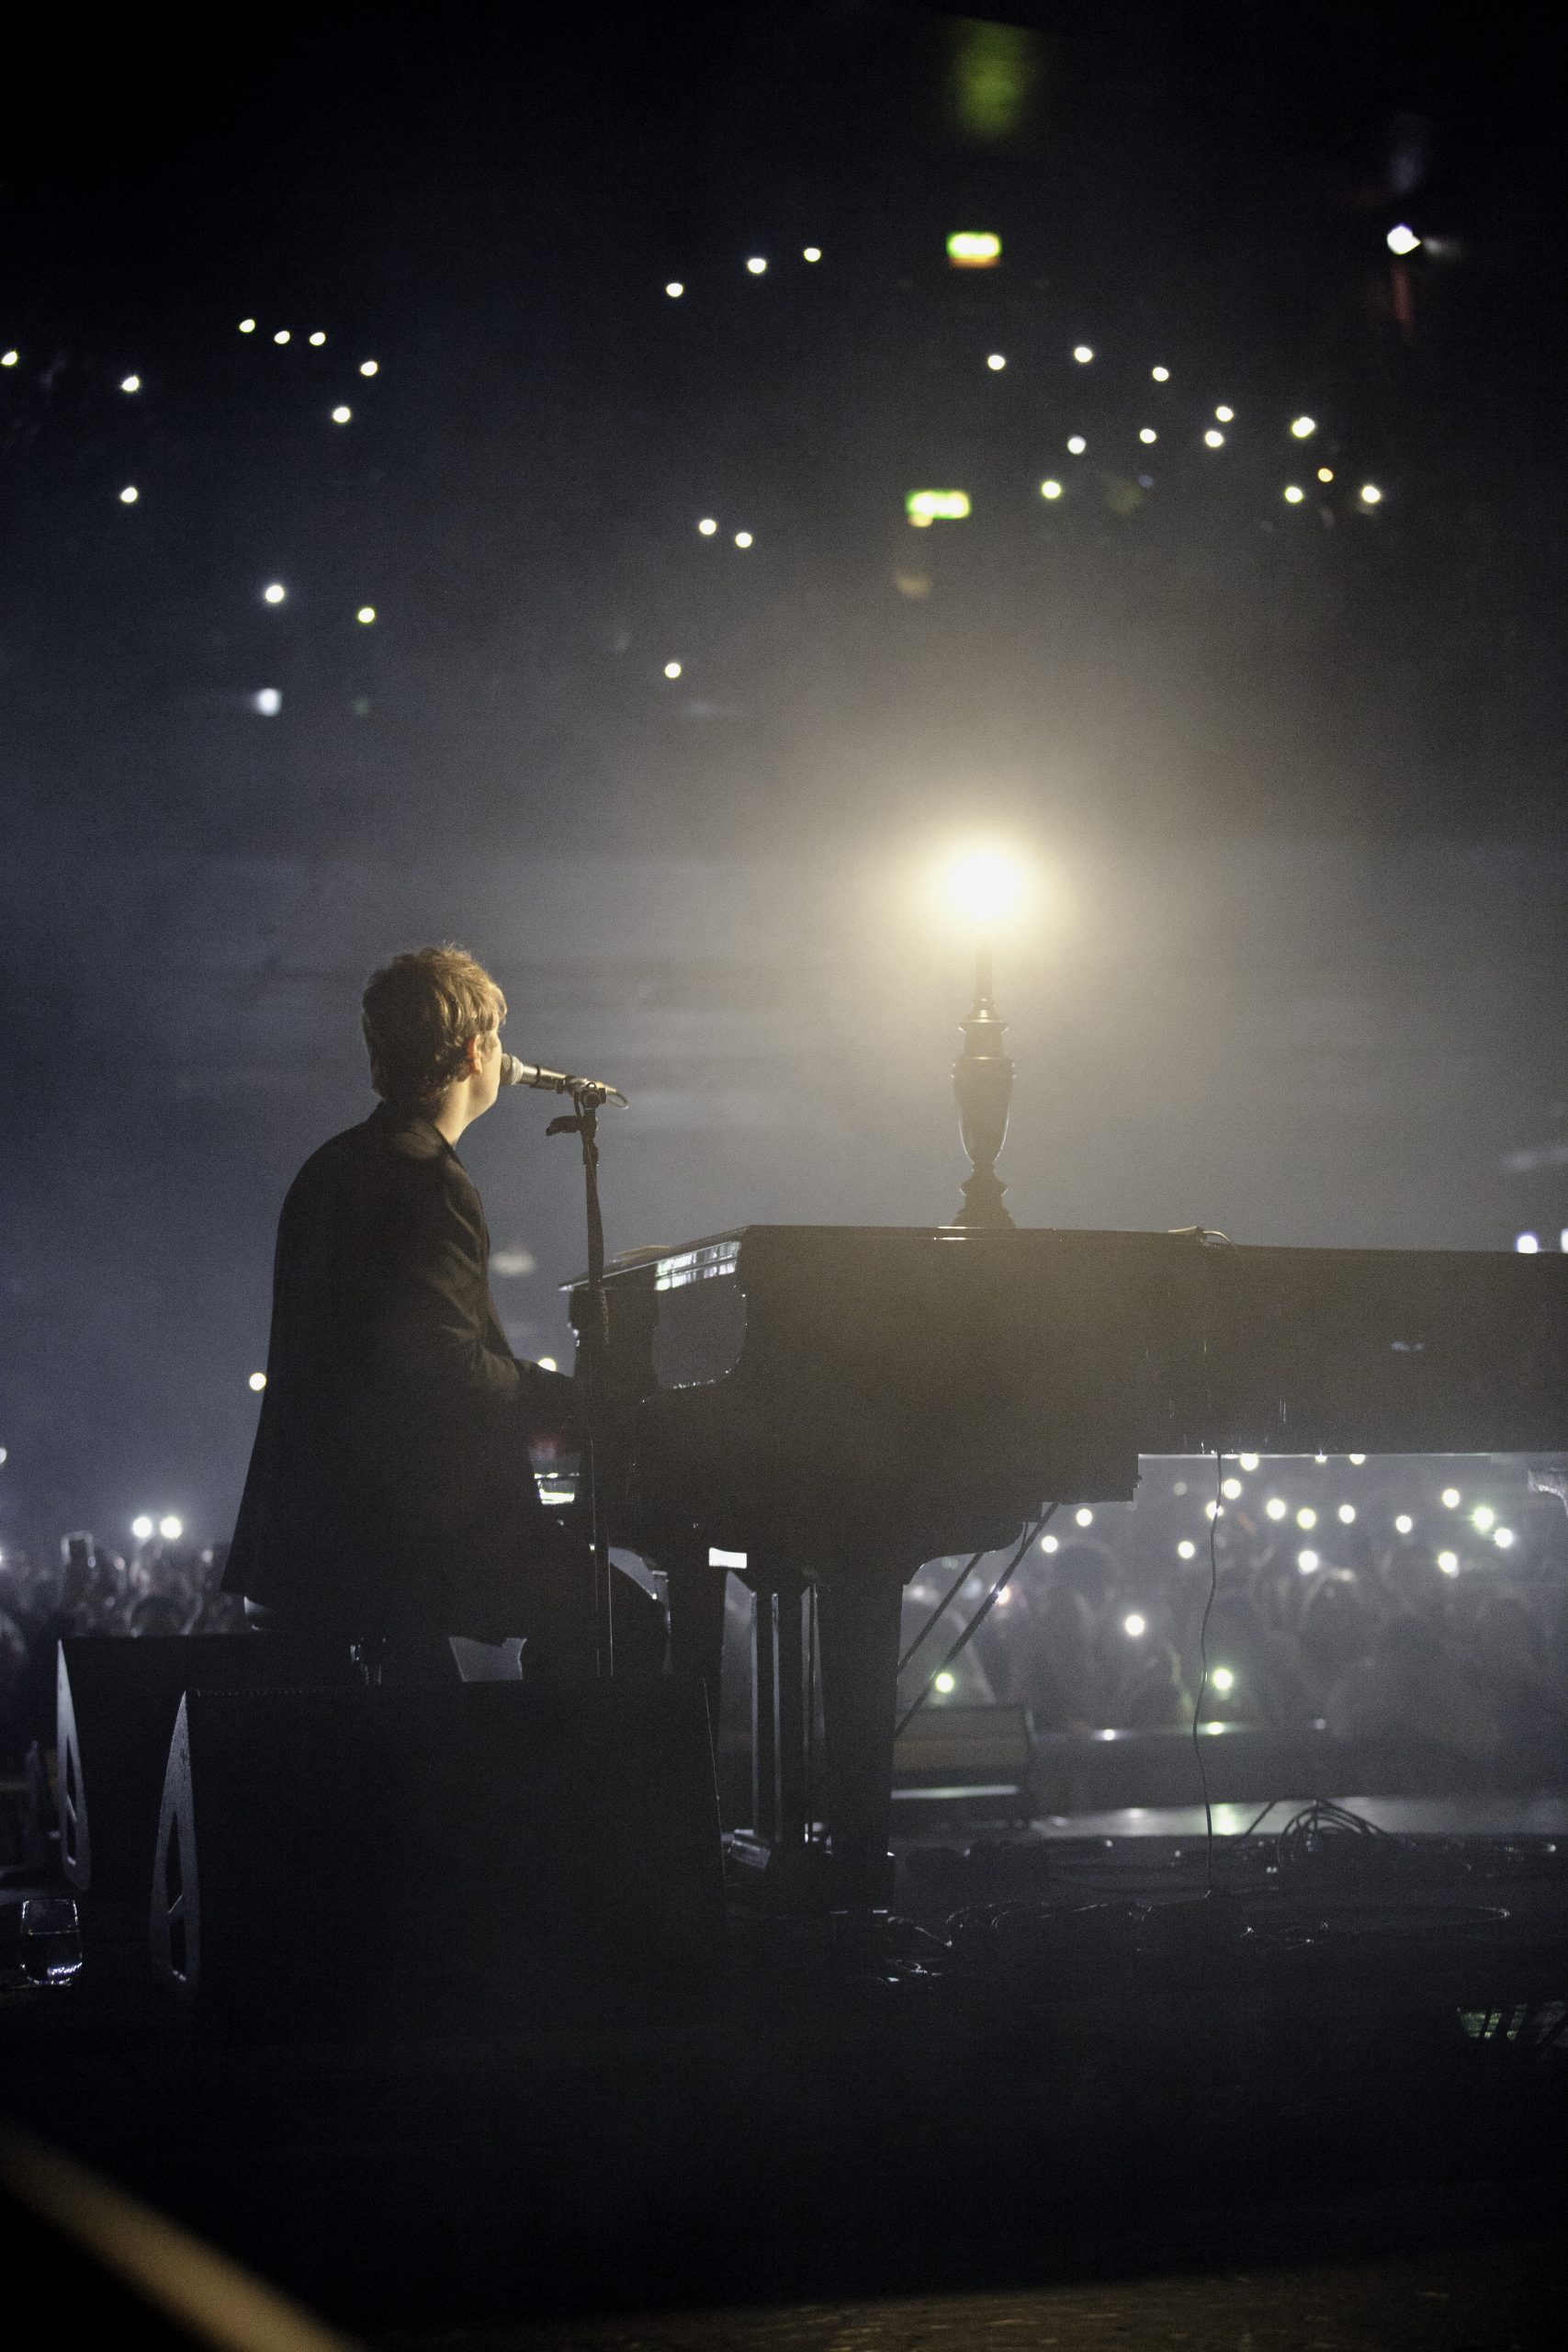 Tom Odell Another Love Wallpapers - Wallpaper Cave